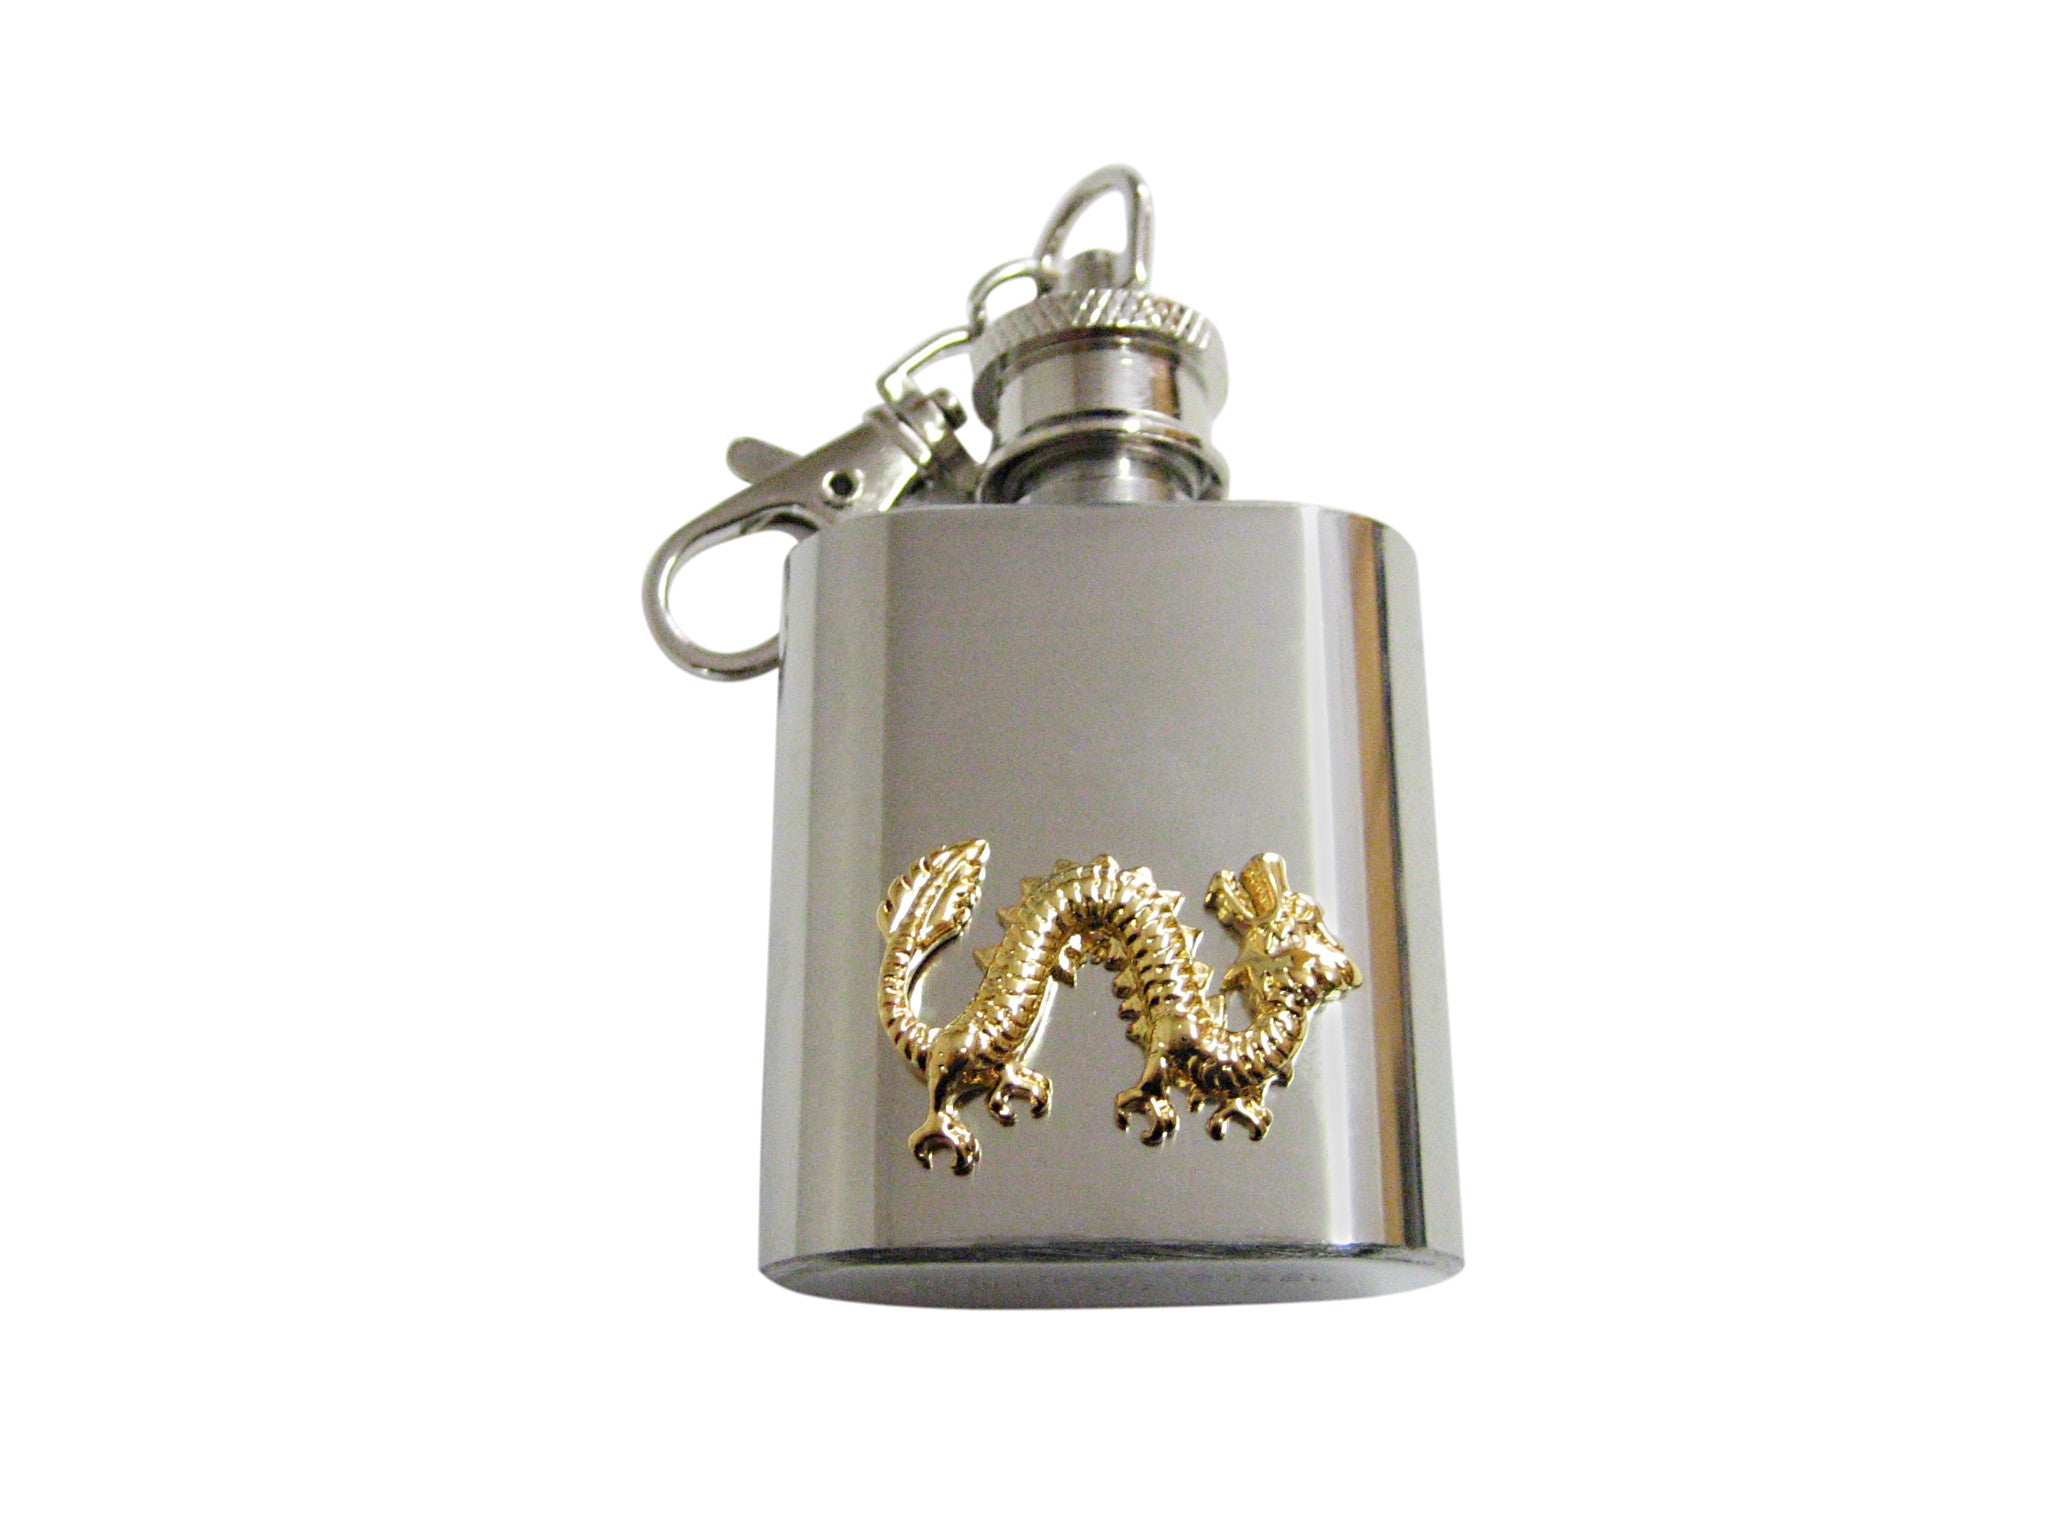 Gold Toned Full Length Dragon 1 Oz. Stainless Steel Key Chain Flask